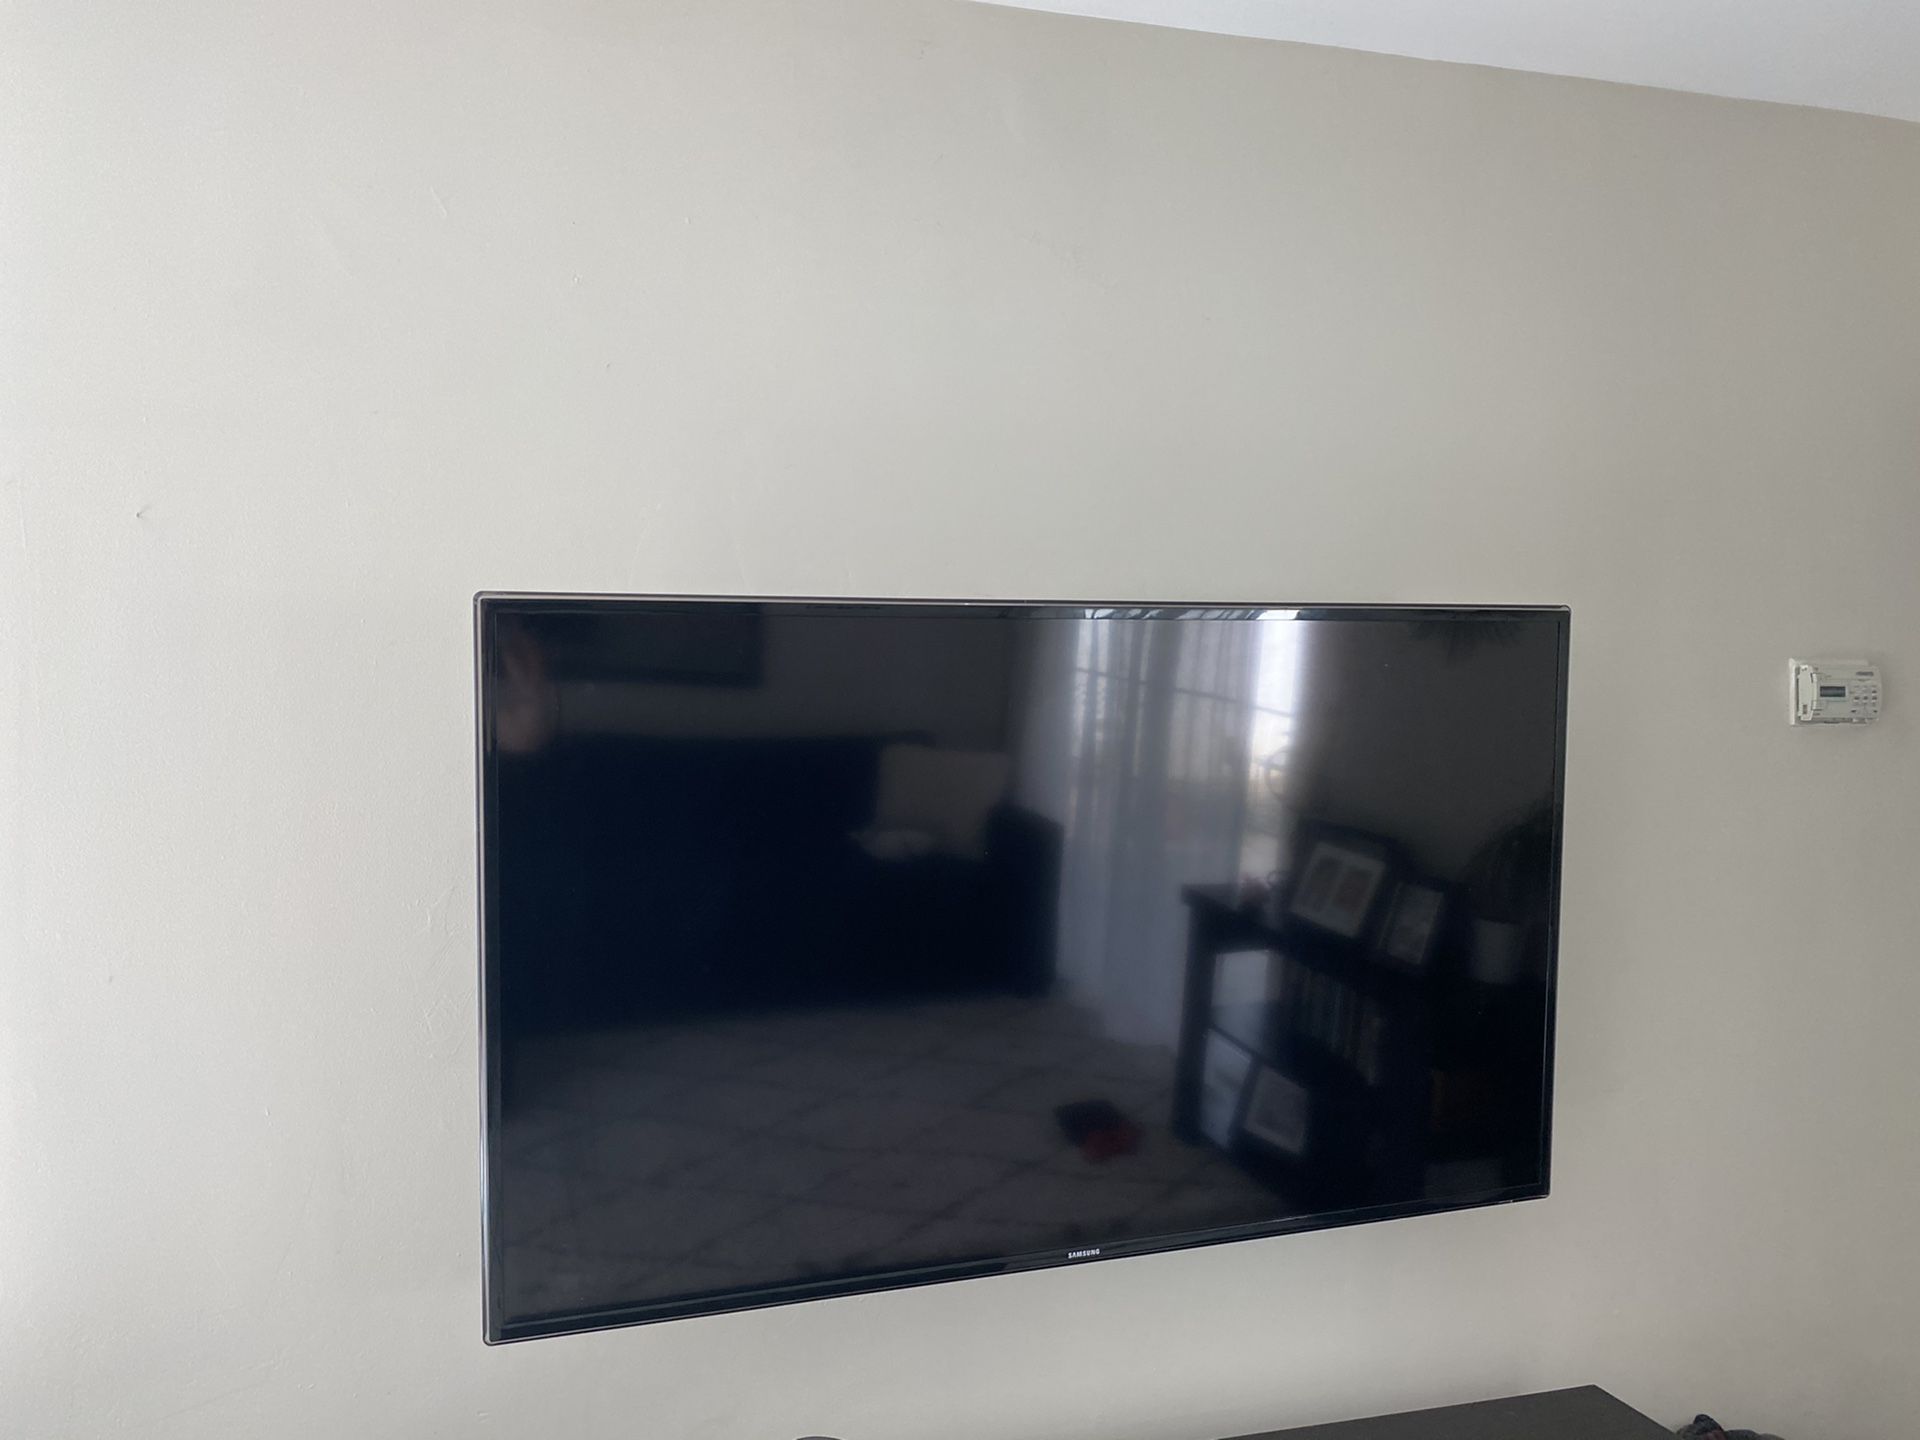 Samsung 60 inch 6350 series, no stand cuts out